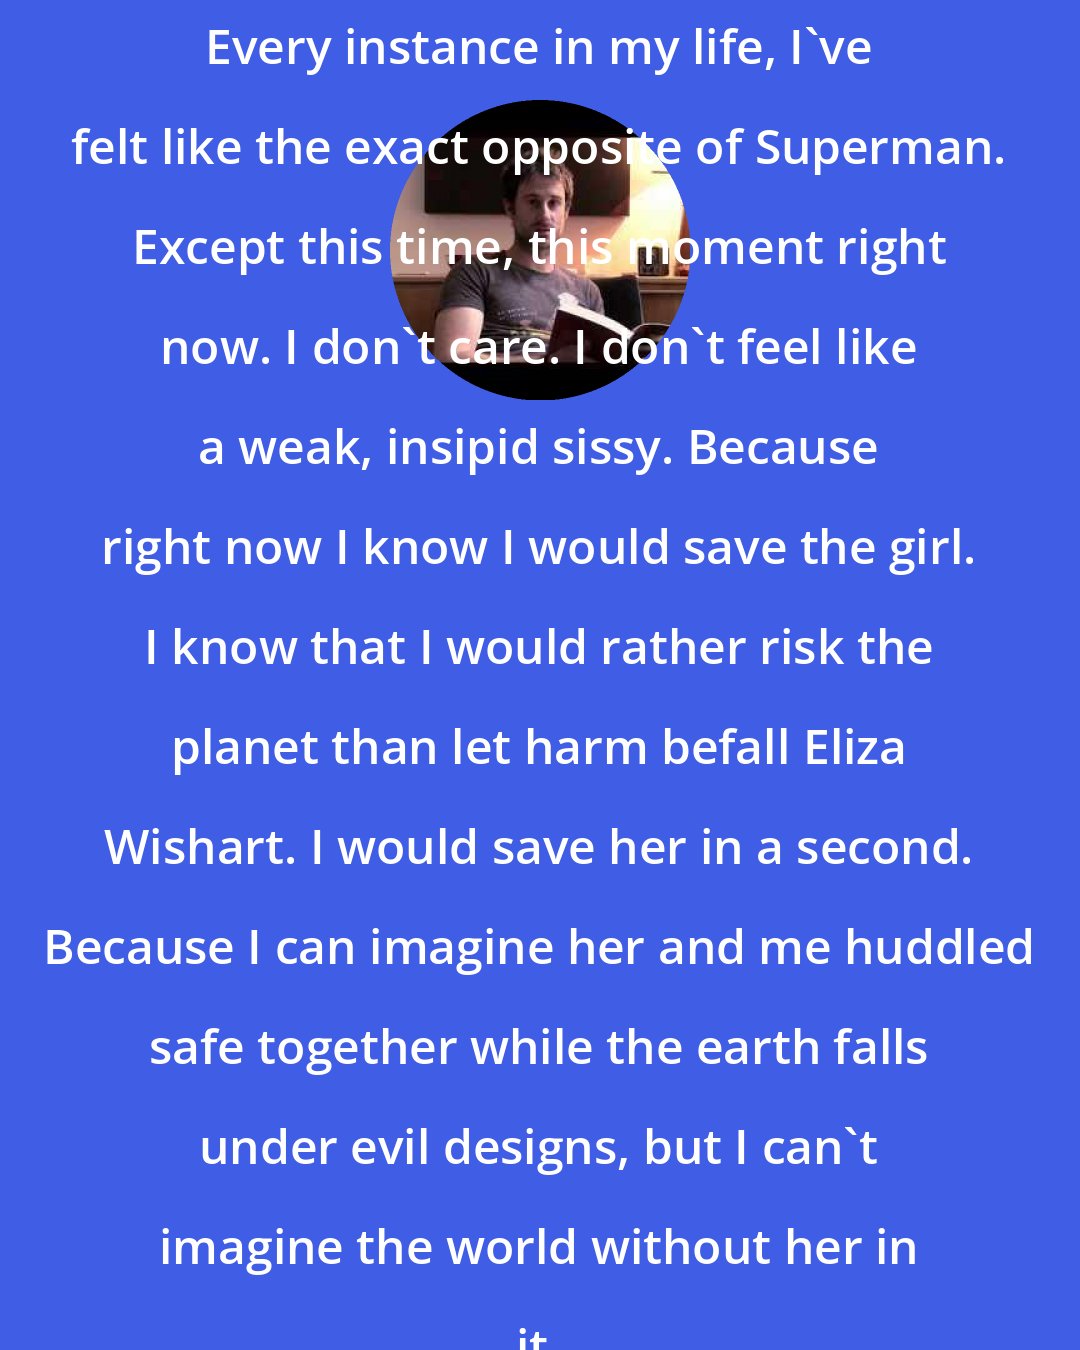 Craig Silvey: Every instance in my life, I've felt like the exact opposite of Superman. Except this time, this moment right now. I don't care. I don't feel like a weak, insipid sissy. Because right now I know I would save the girl. I know that I would rather risk the planet than let harm befall Eliza Wishart. I would save her in a second. Because I can imagine her and me huddled safe together while the earth falls under evil designs, but I can't imagine the world without her in it.